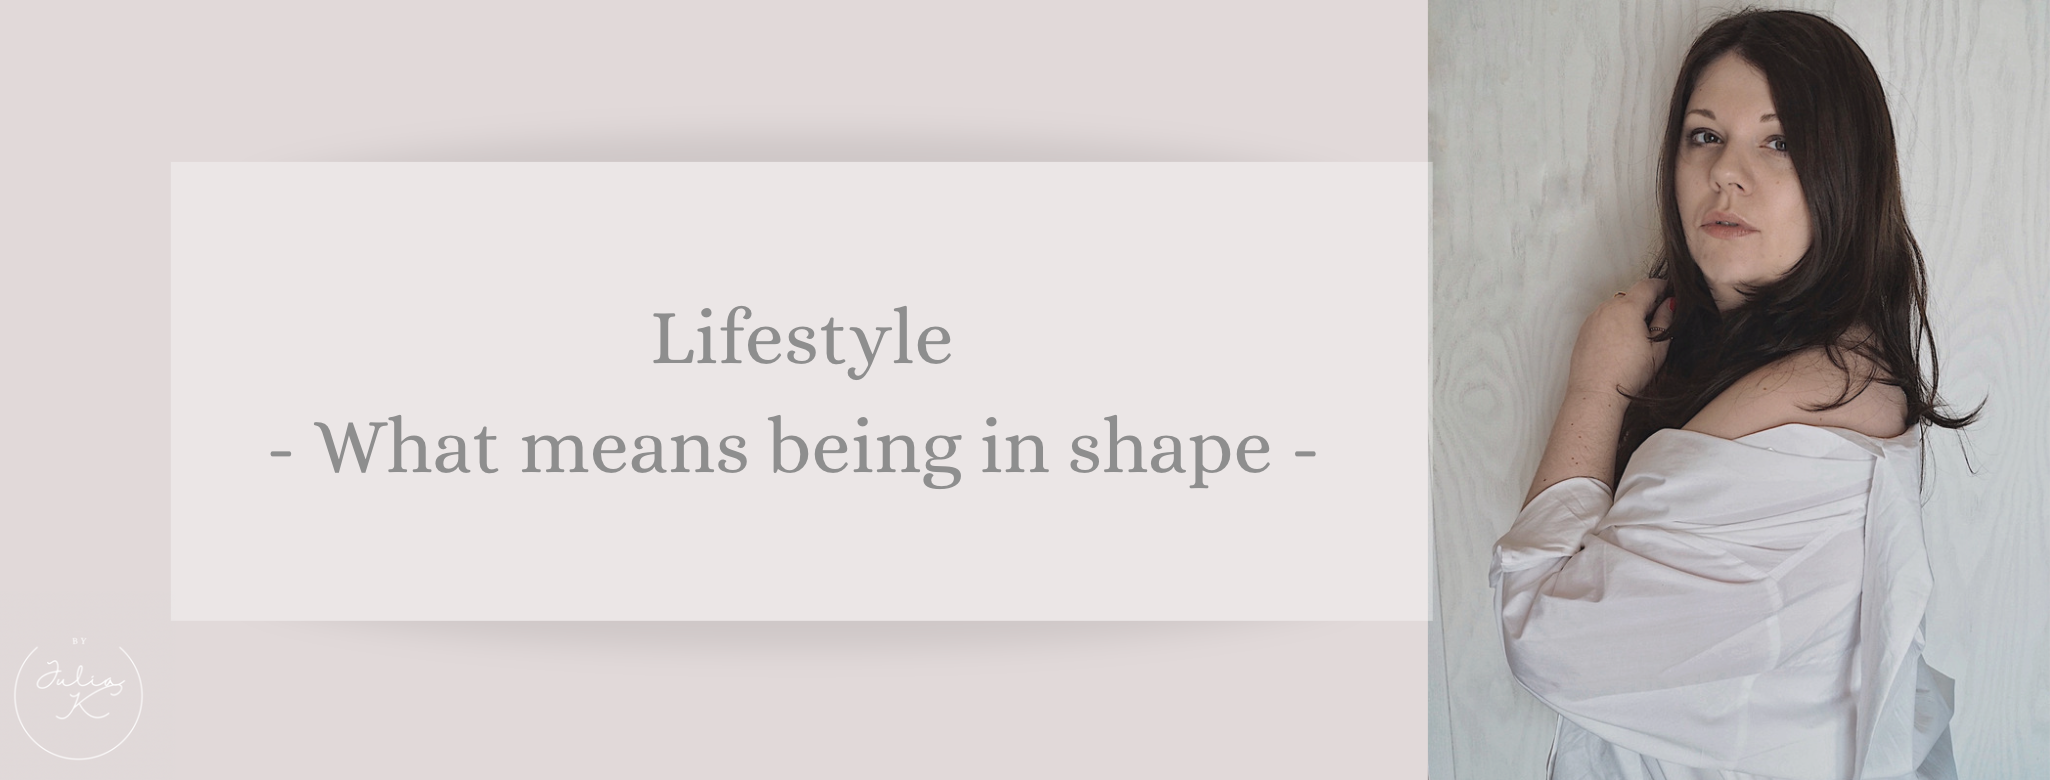 Lifestyle: What means ‚being in shape‘